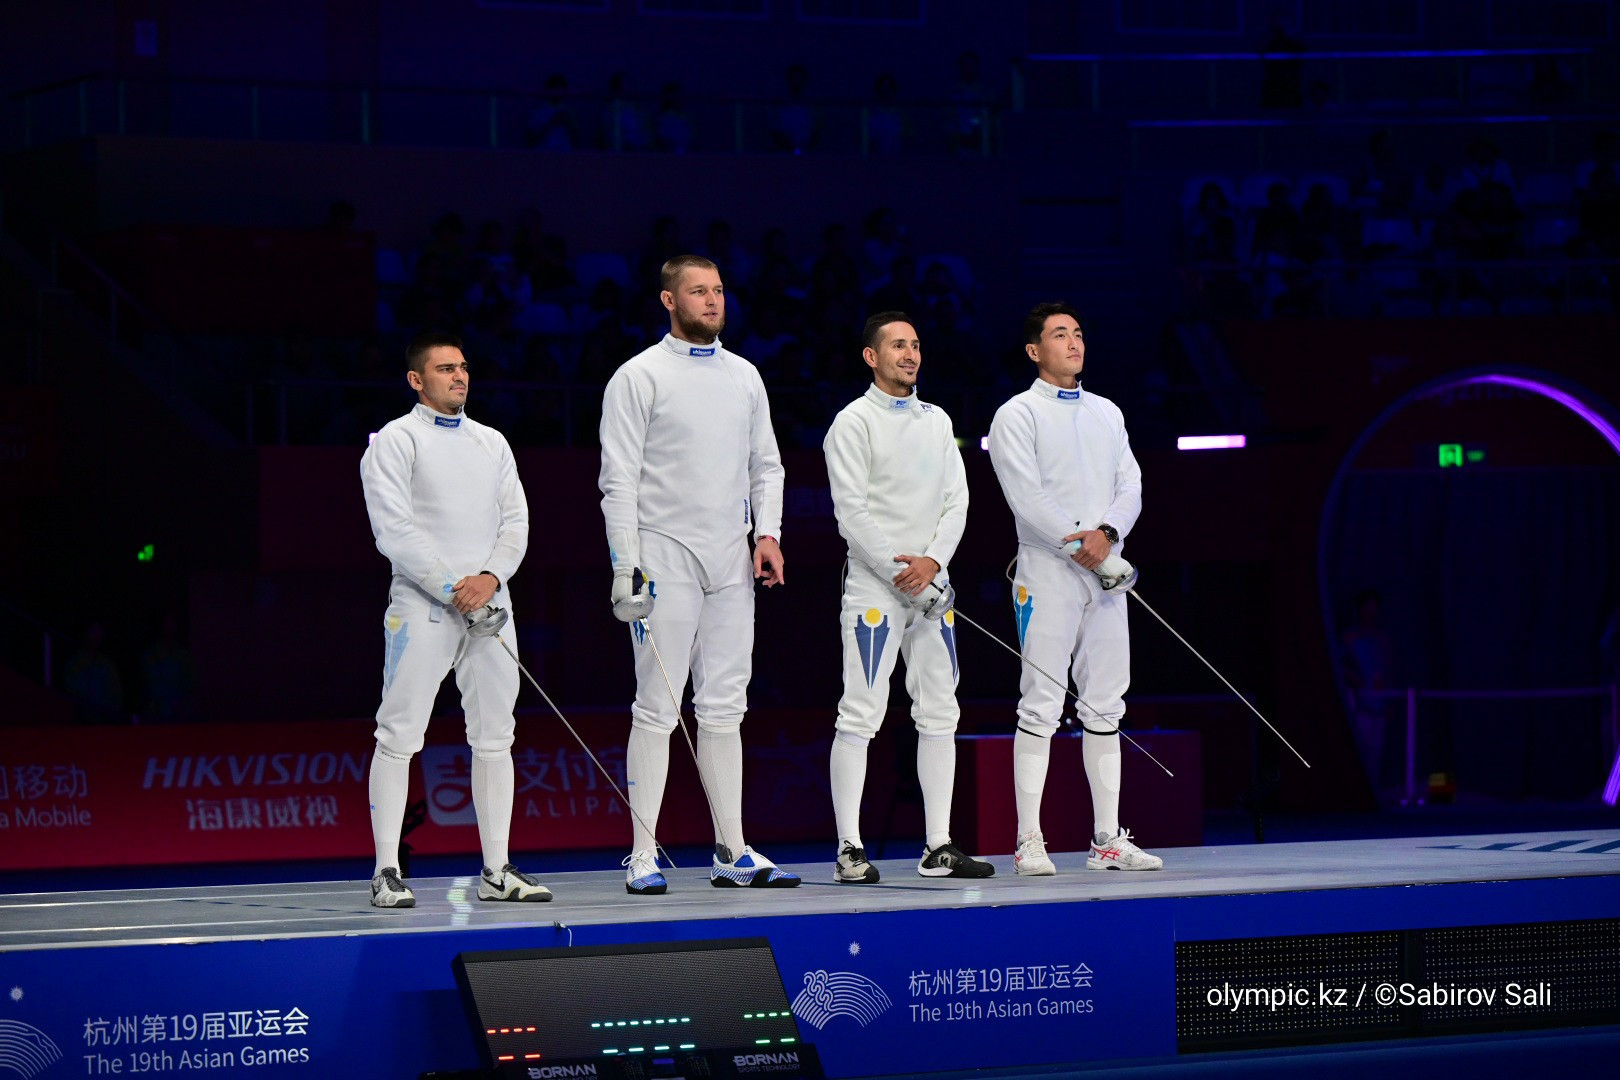 Kazakhstan Wins Silver in Fencing at 19th Asian Games